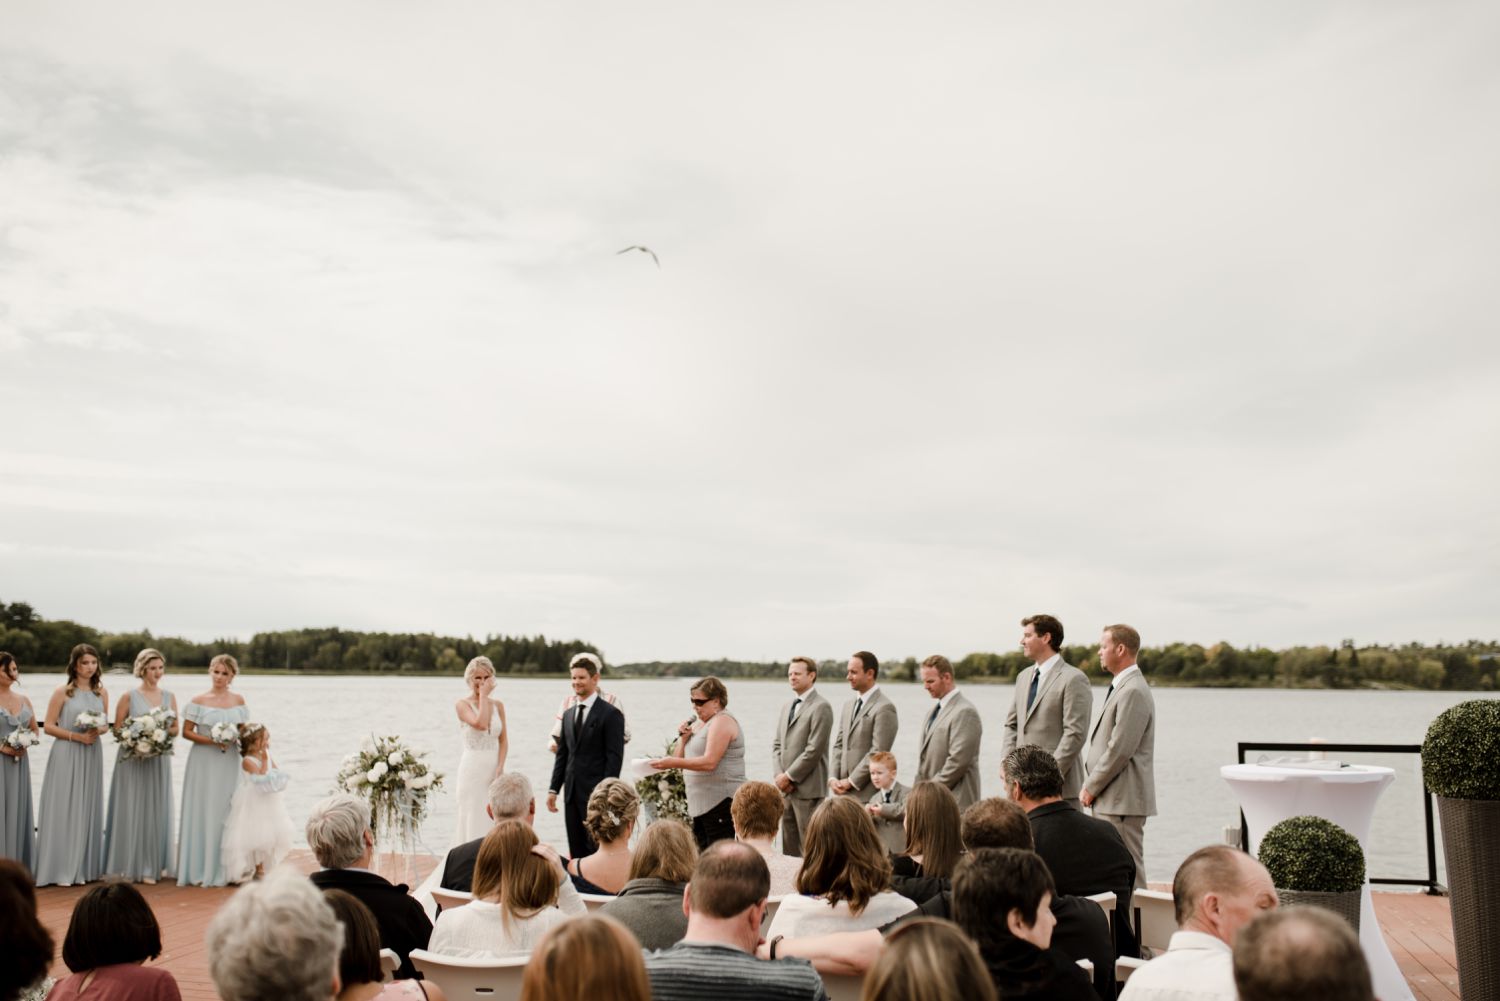 Kenora wedding, a fall wedding in Ontario, photographed by Vanessa Renae Photography, a Winnipeg and Kenora wedding photographer